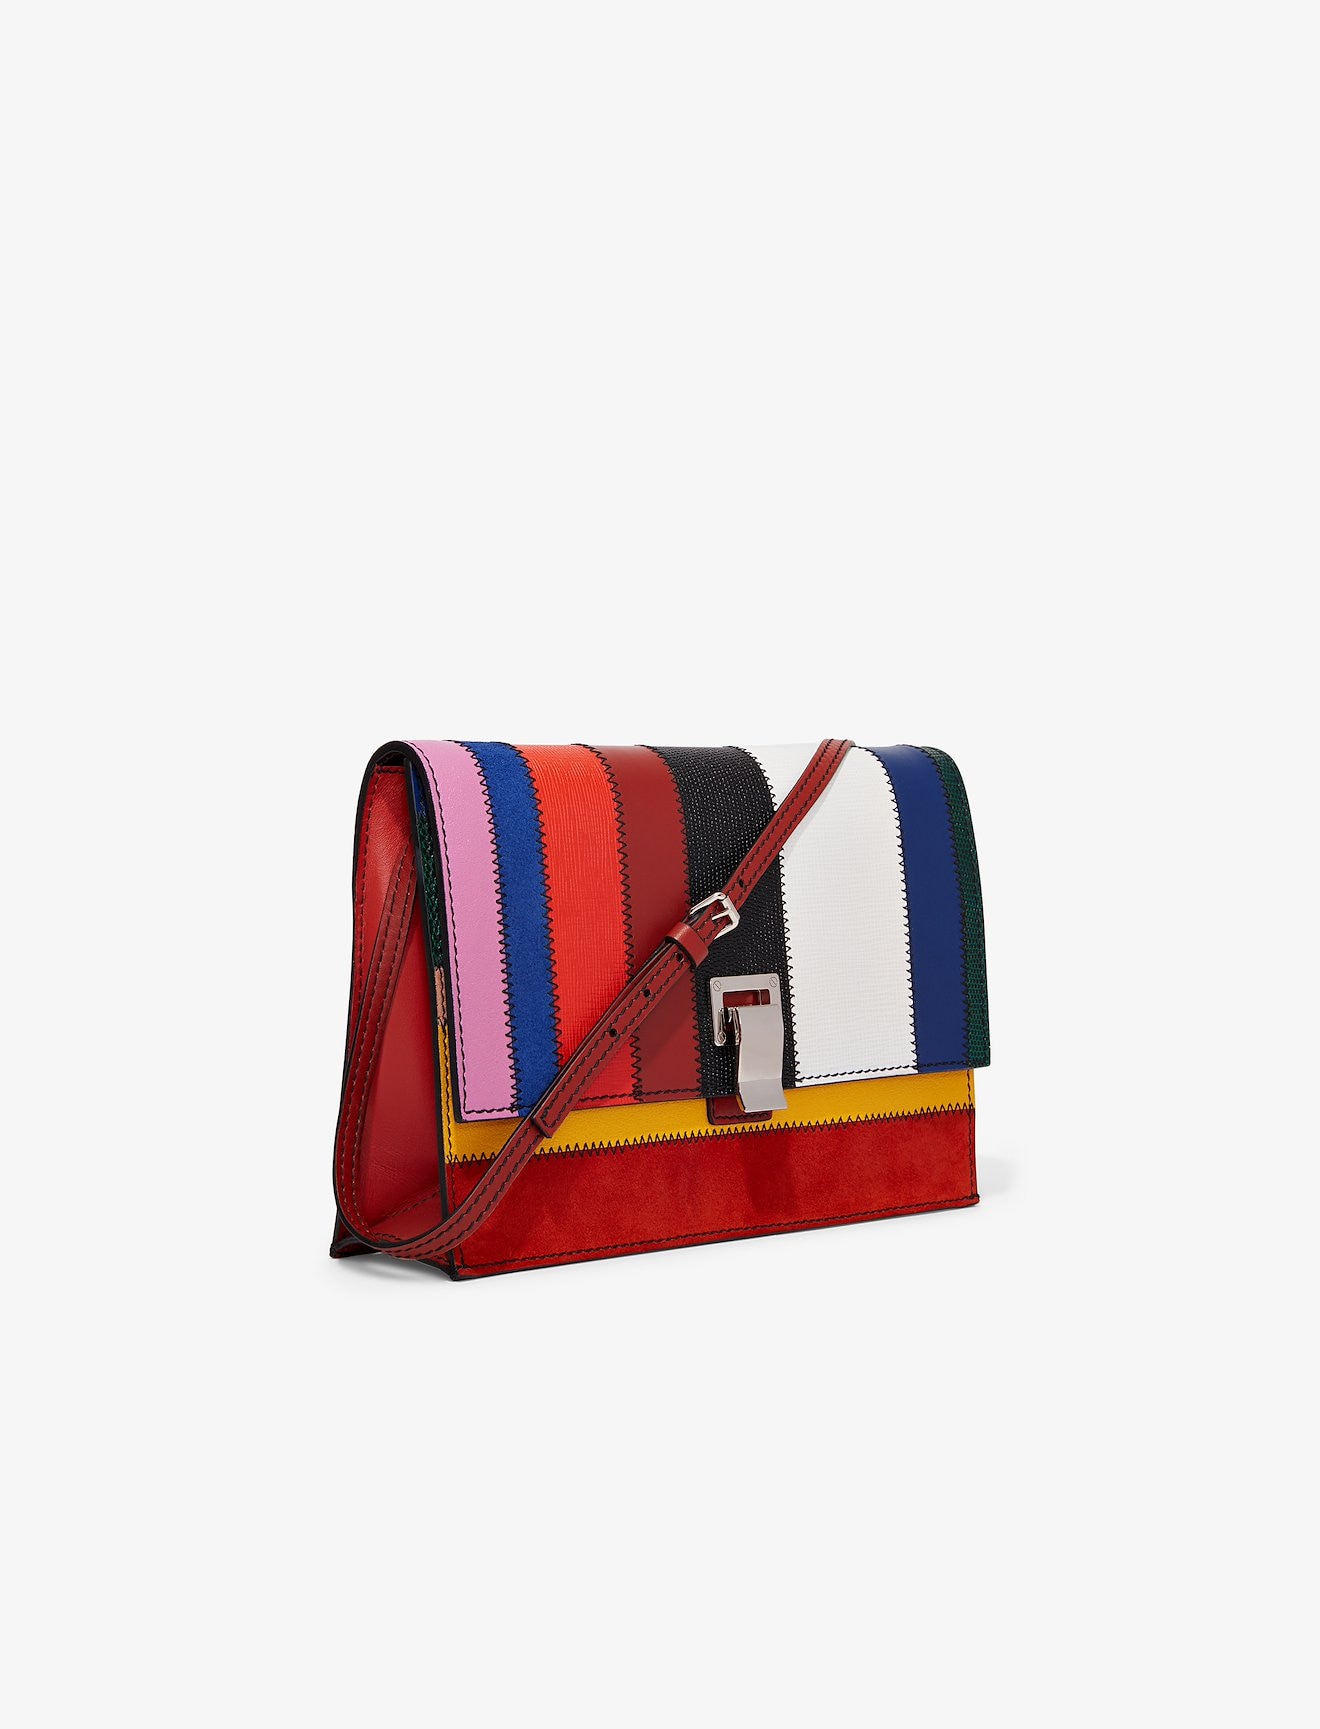 Patchwork Small Lunch Bag in multicolour | Proenza Schouler